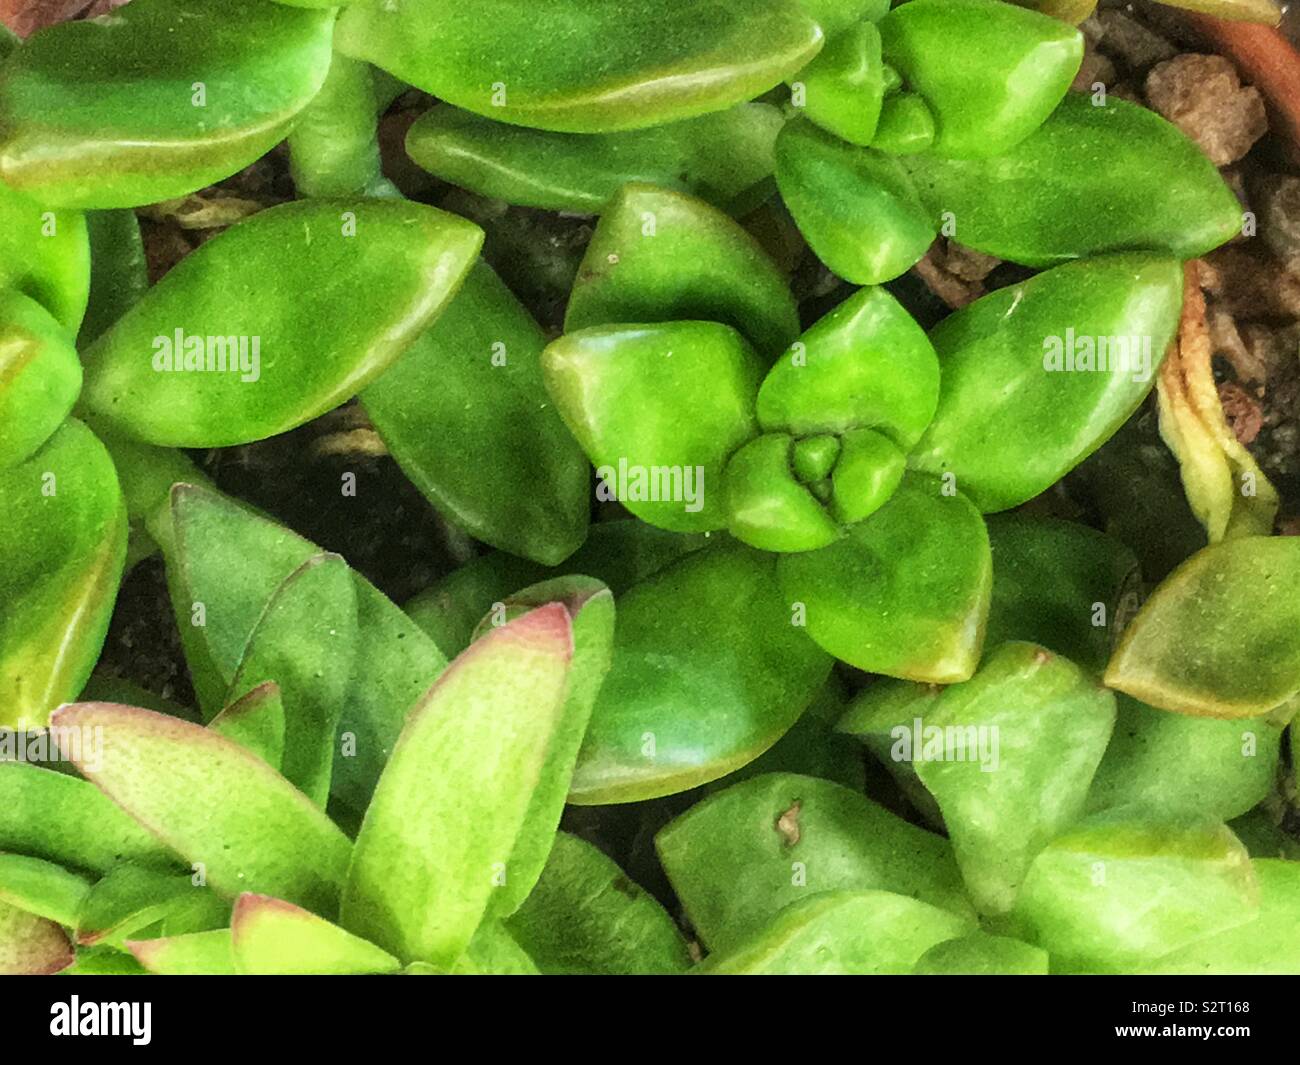 Growing, potted garden of beautiful green succulent plants. Stock Photo